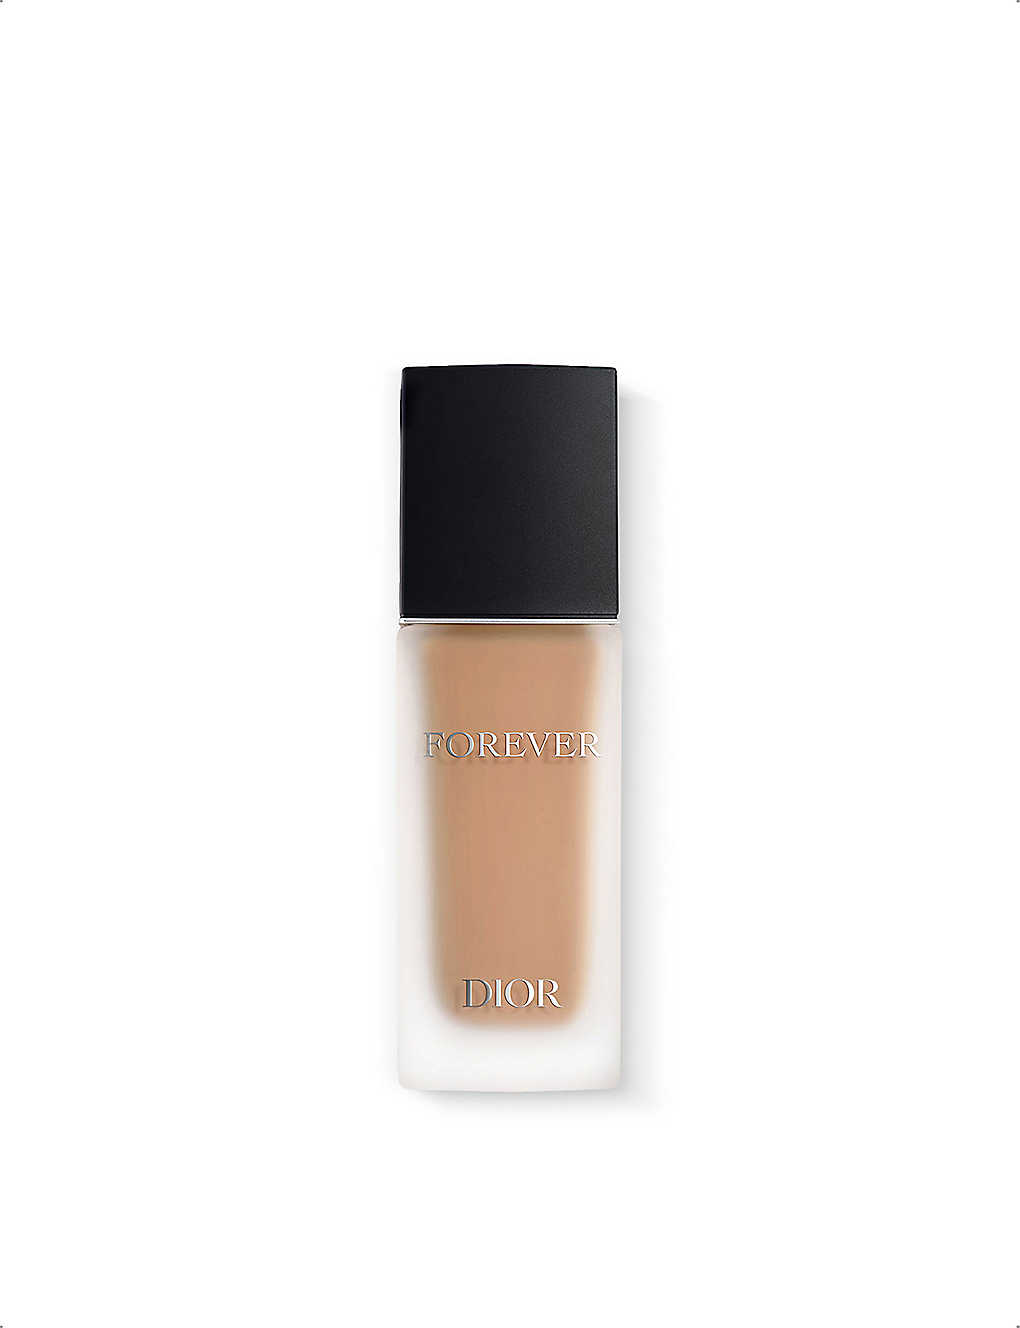 Dior Forever Matte Spf15 Foundation 30ml In 3wp